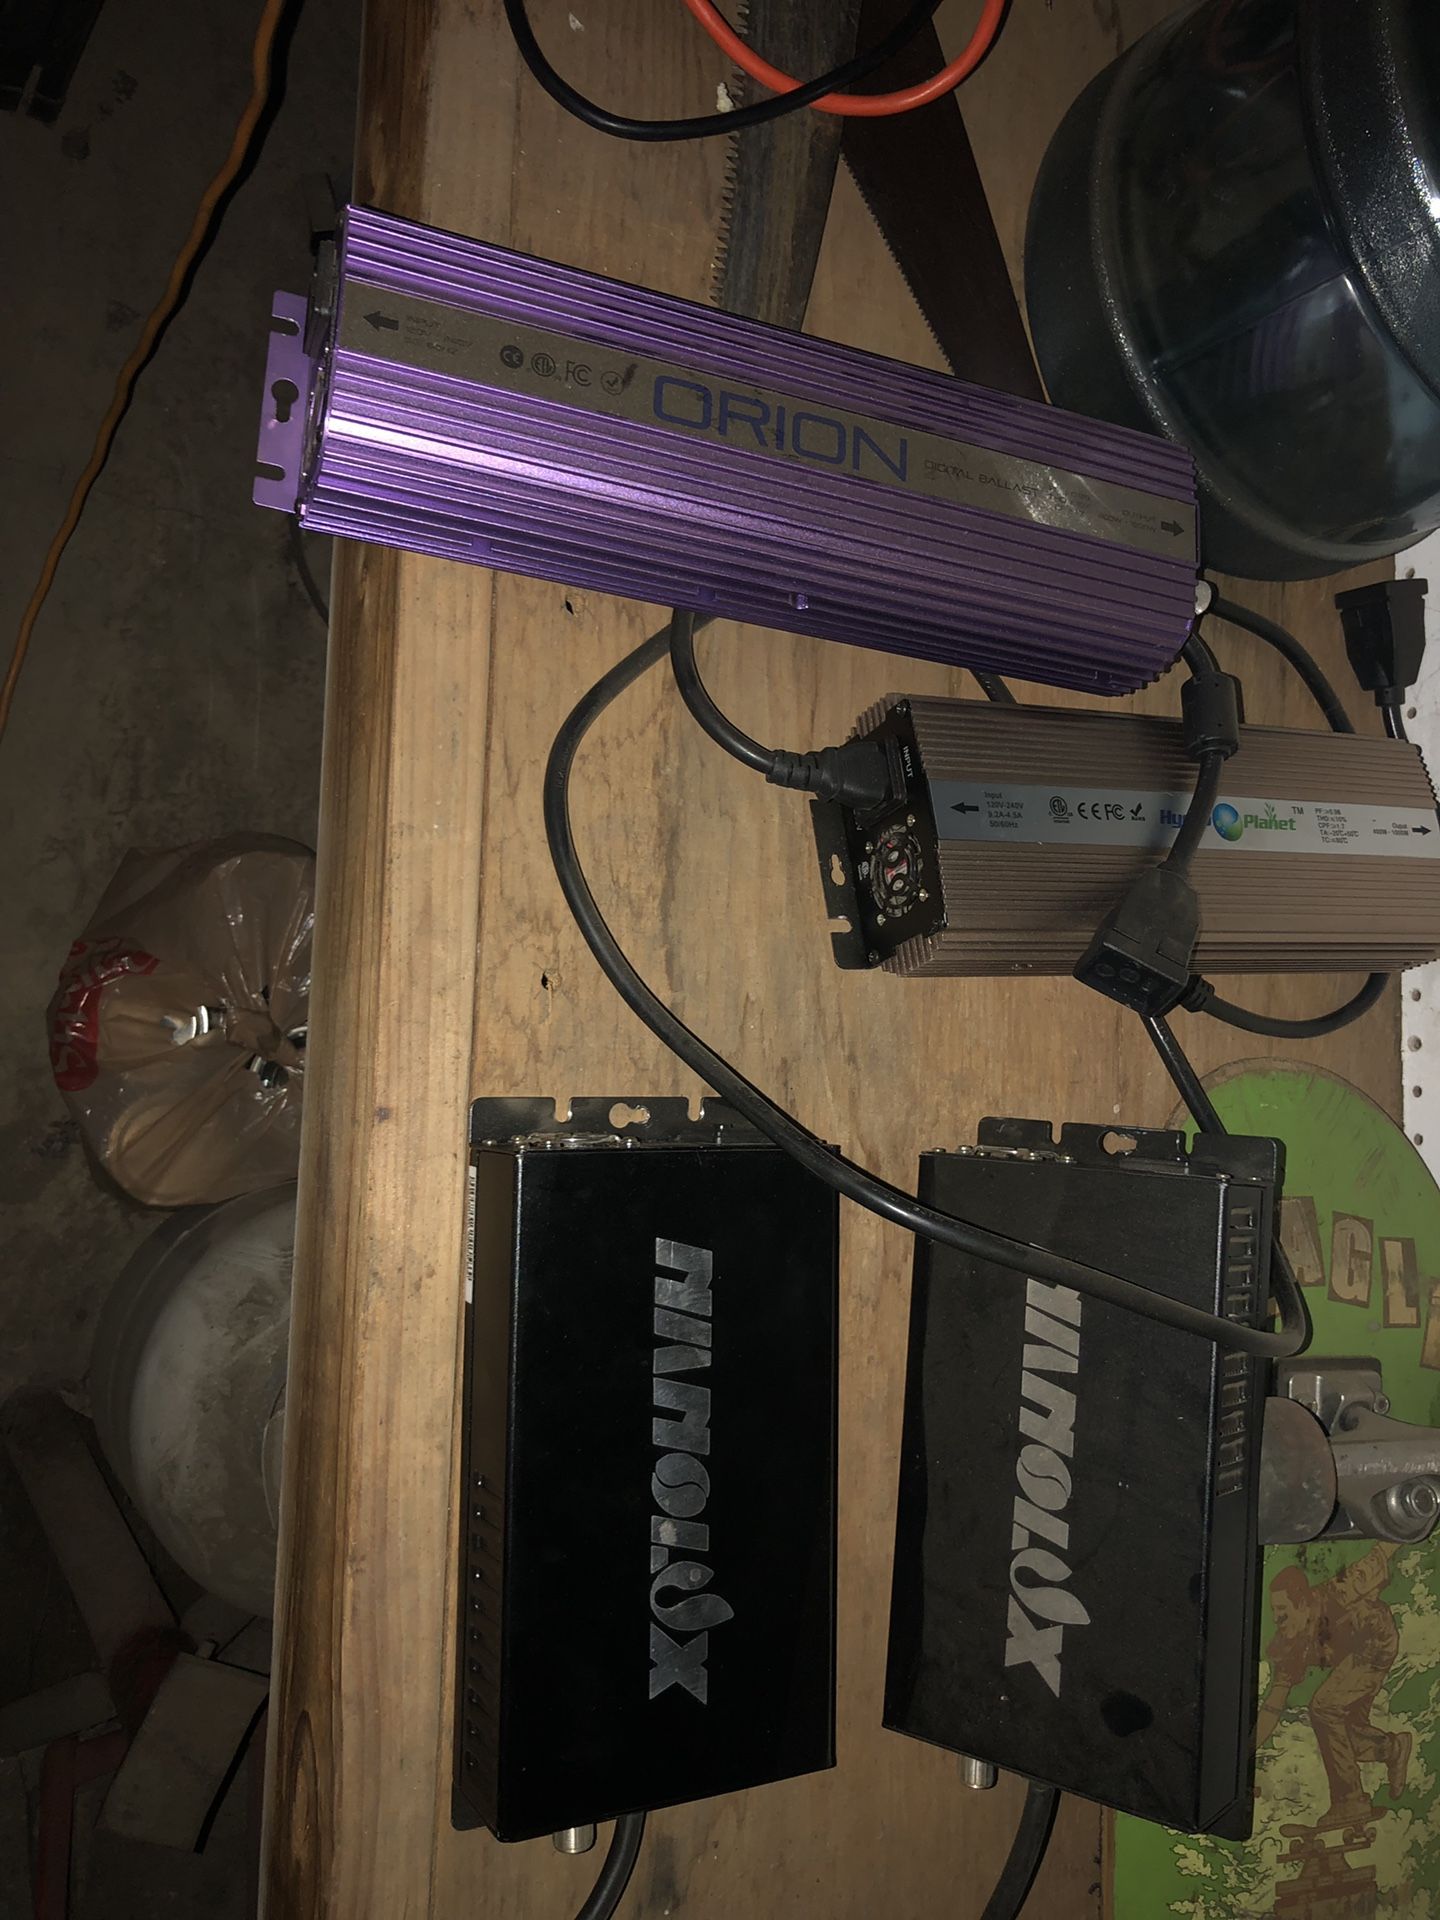 Nanolux,Orion and hydro planet ballasts